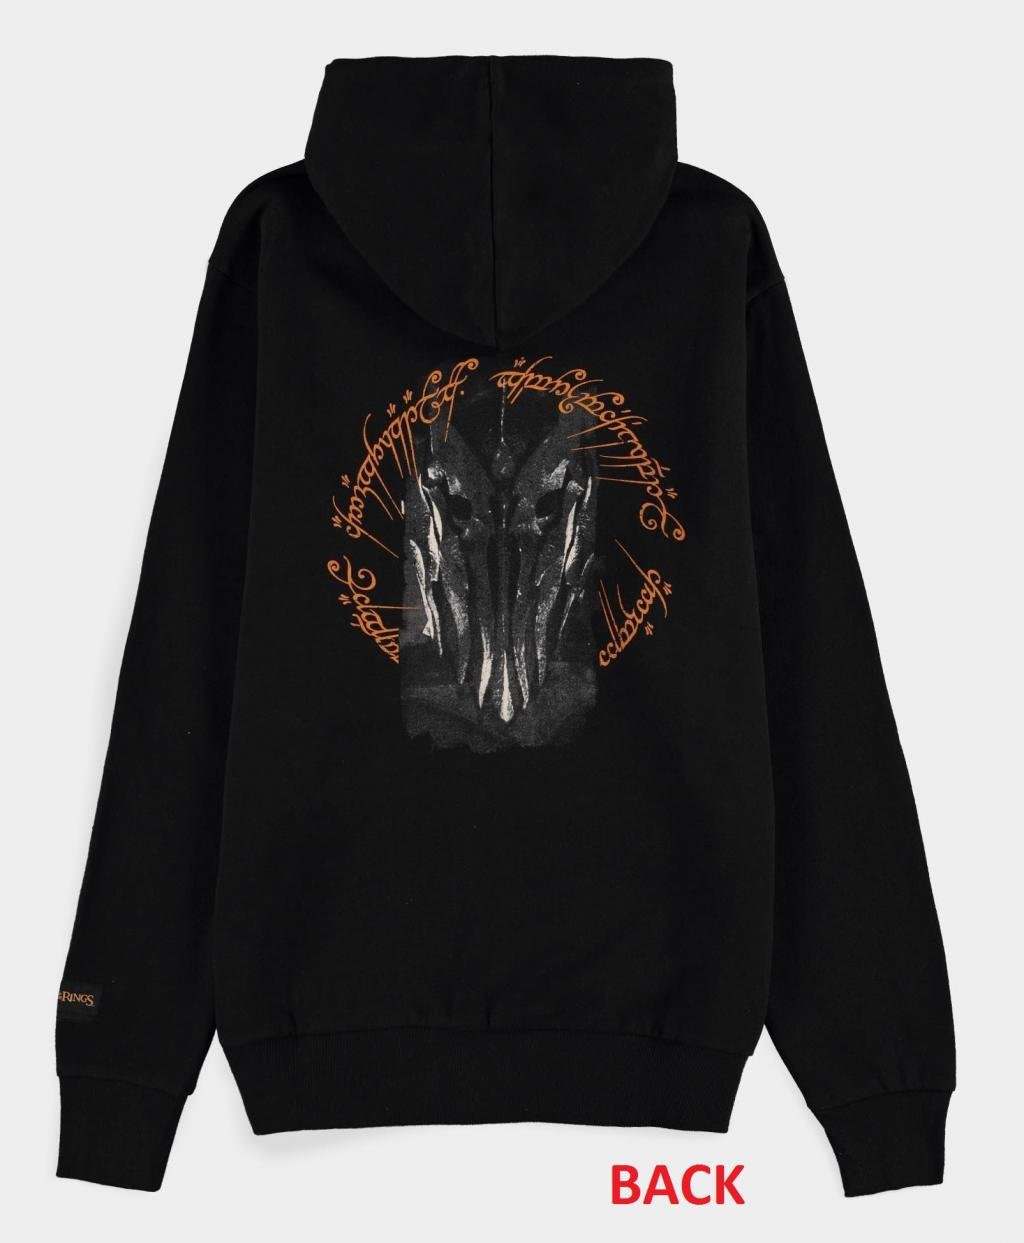 LORD OF THE RINGS - Sauron - Men's Zipper Hoodie (XL)